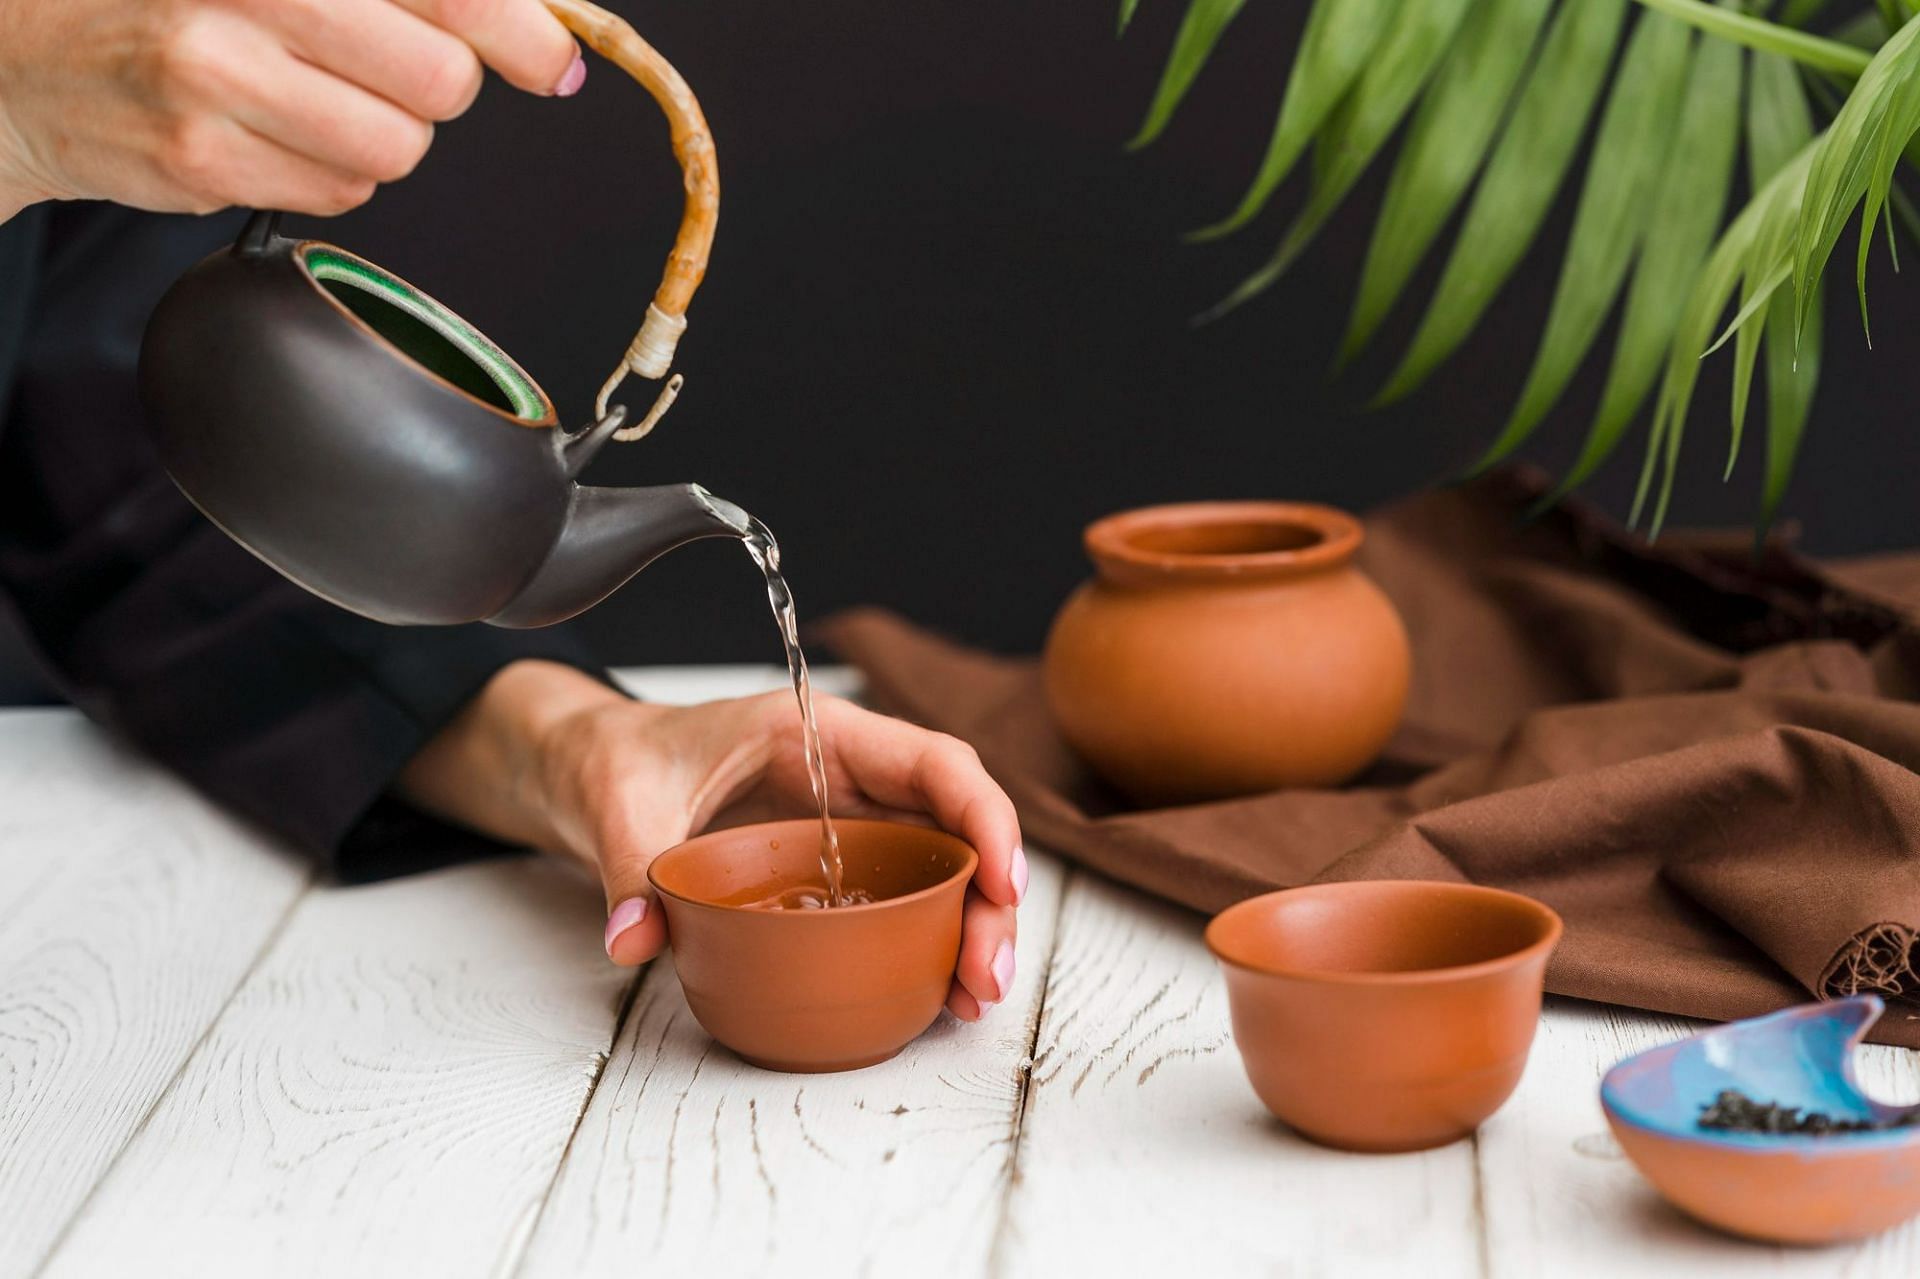 Clay pot water purifies the water and acts as a natural purifier (Image by Freepik)